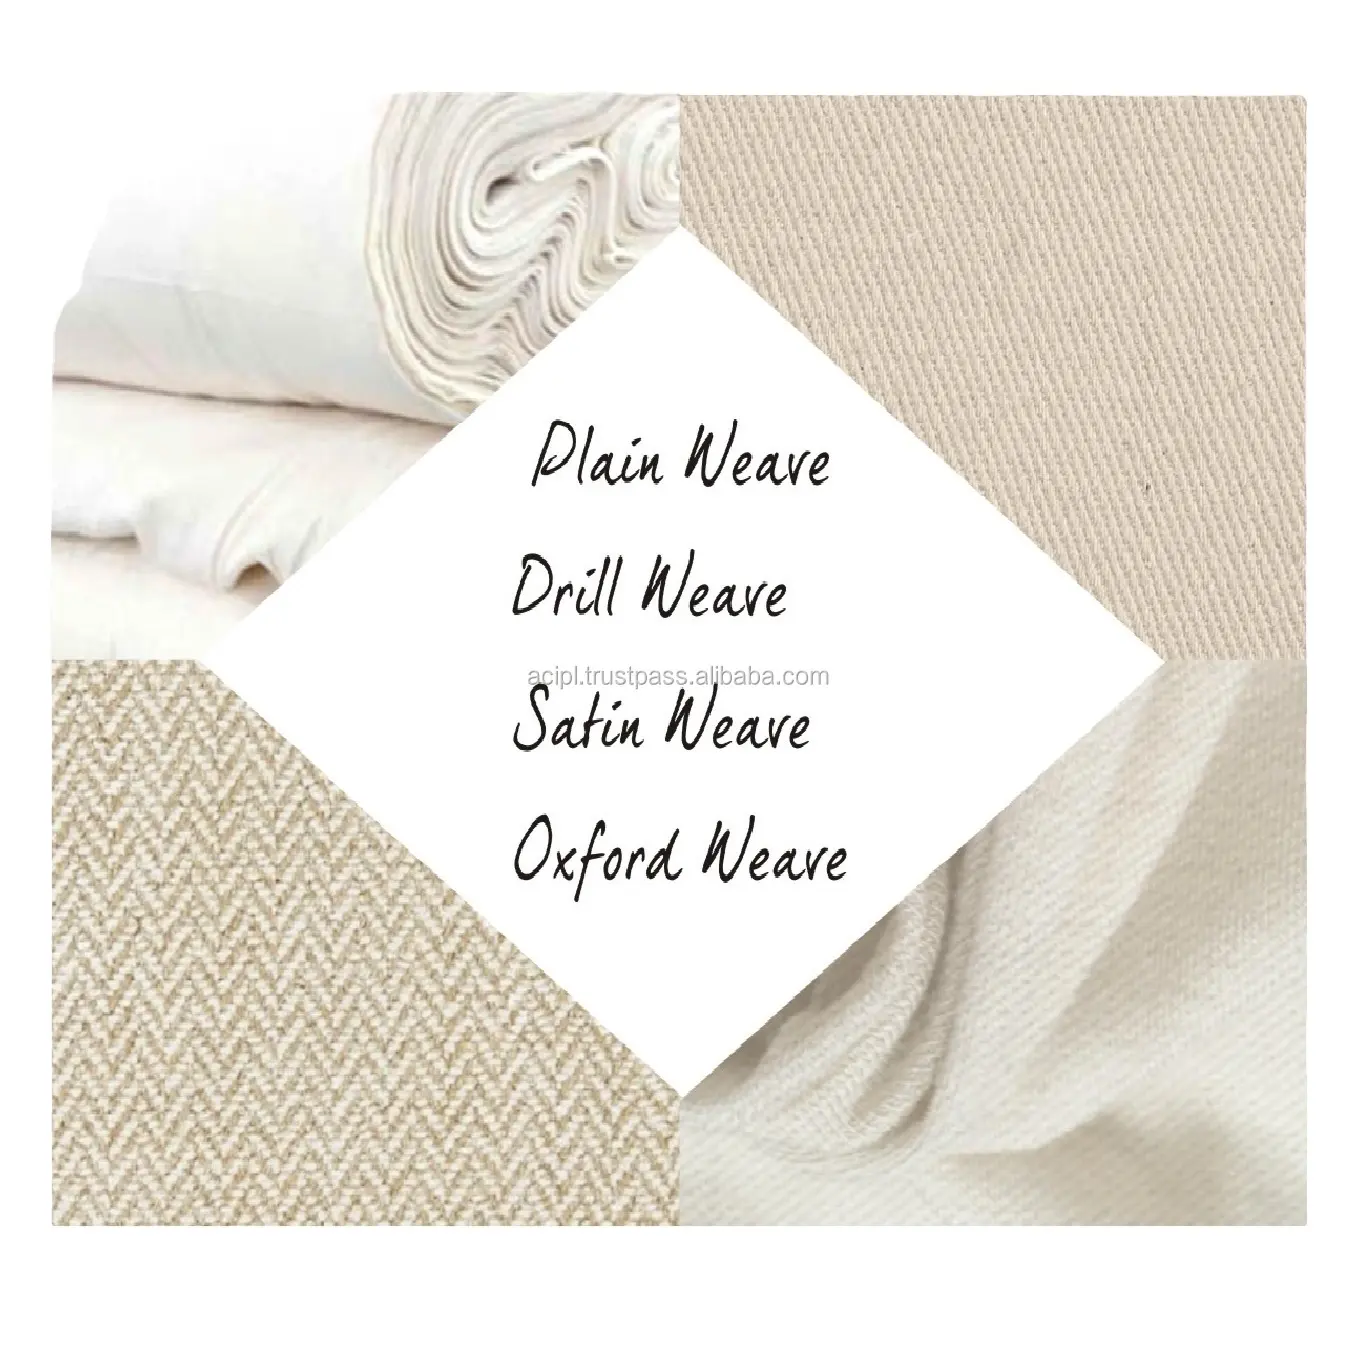 Cotton fabric bleached white width 120 inch gsm 180 flat packing roll packing with good quality Indian raw materials